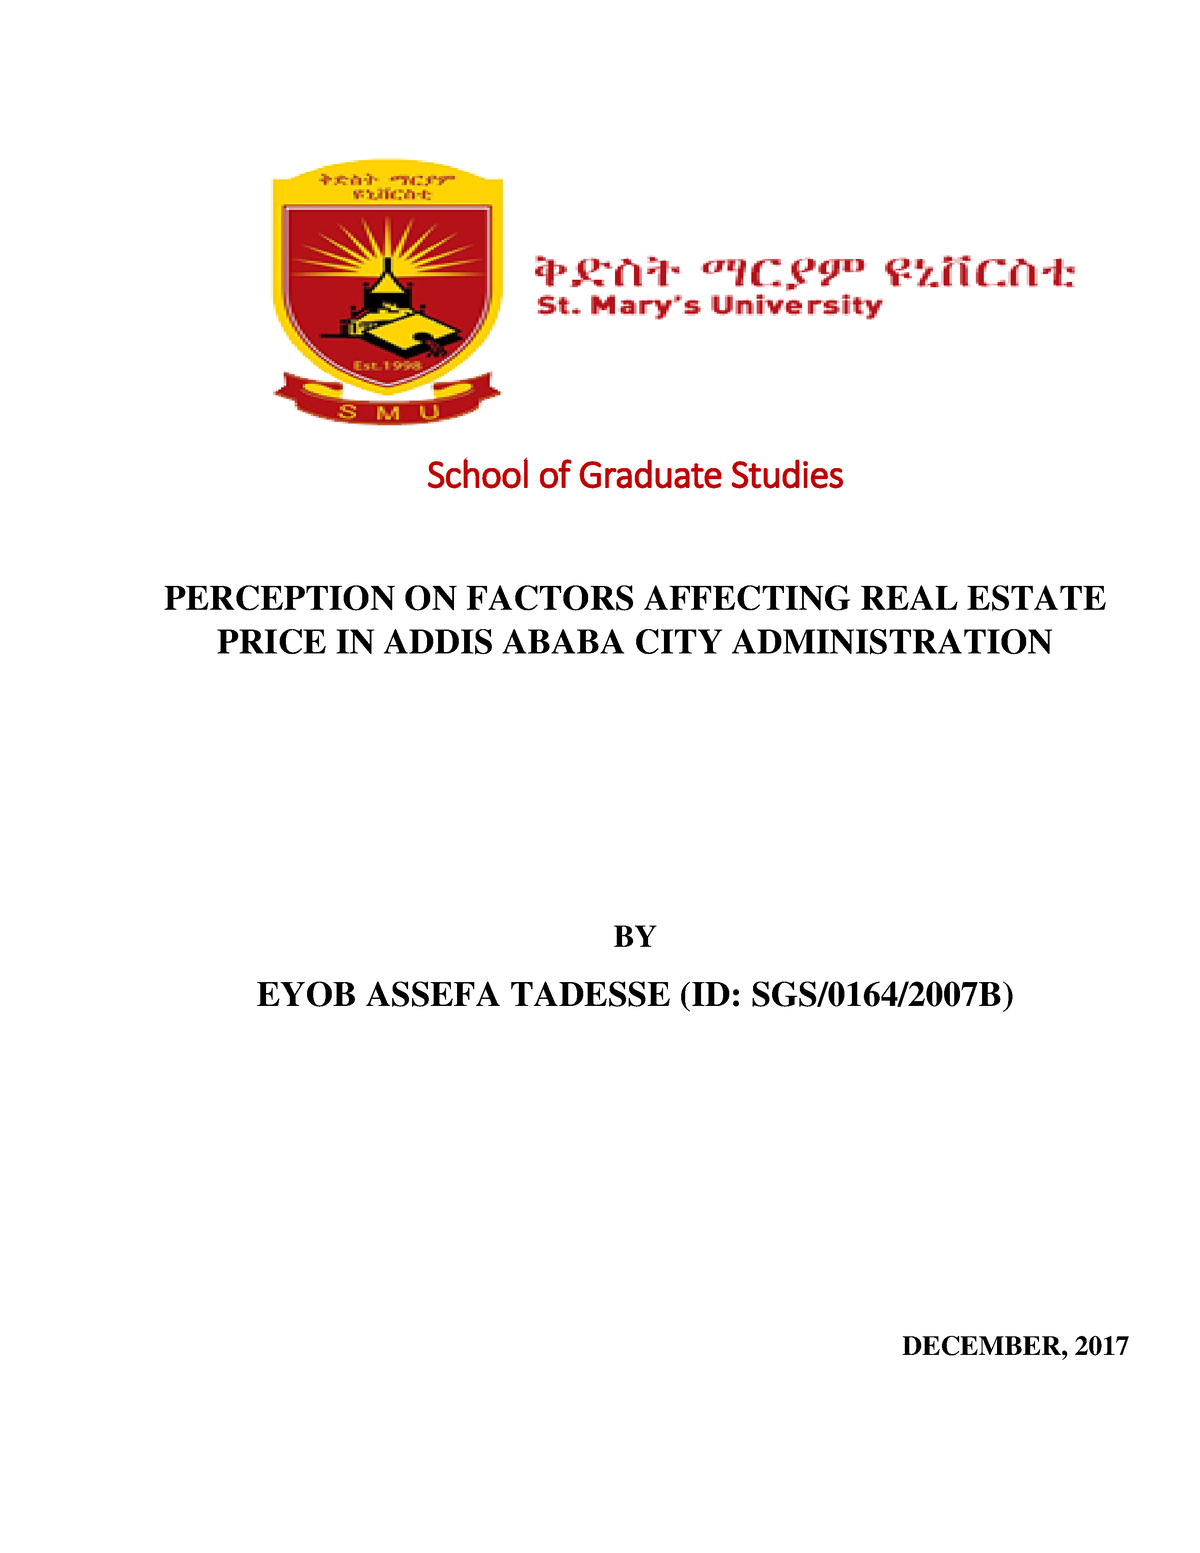 phd thesis in real estate